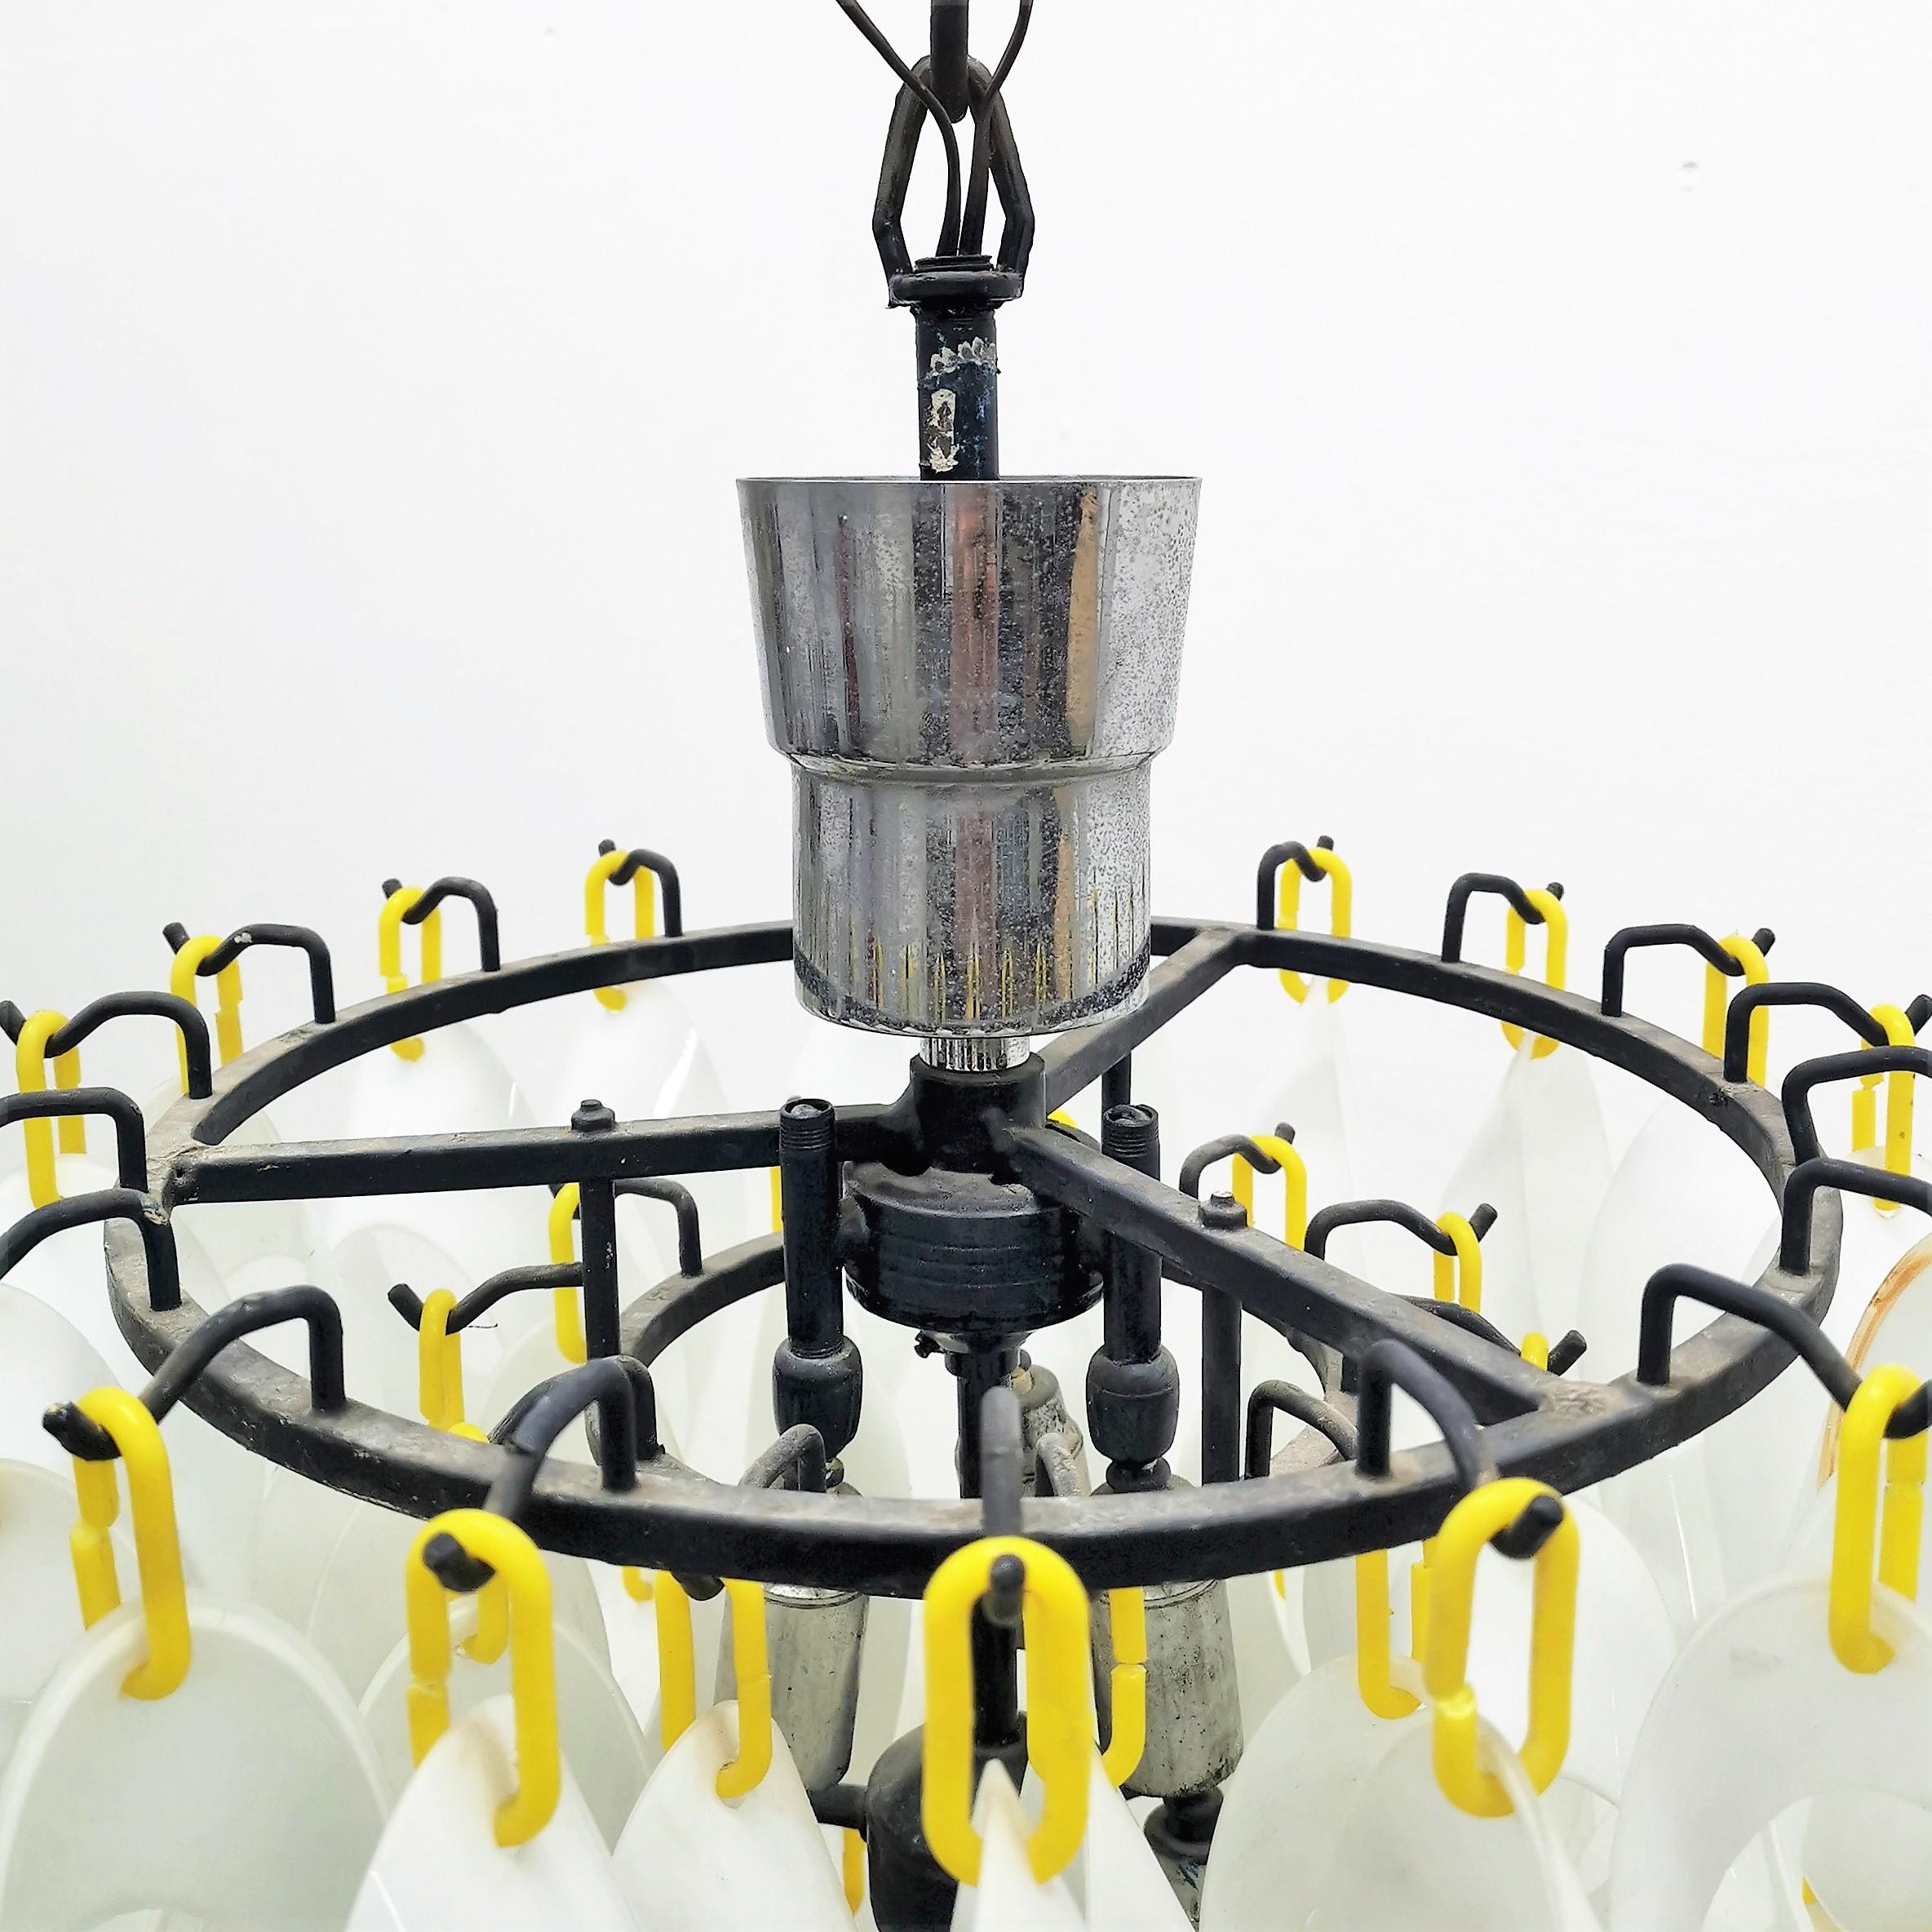 Mid-Century Vistosi Glass Chandelier Made of Modular Elements 1960s Italy For Sale 7